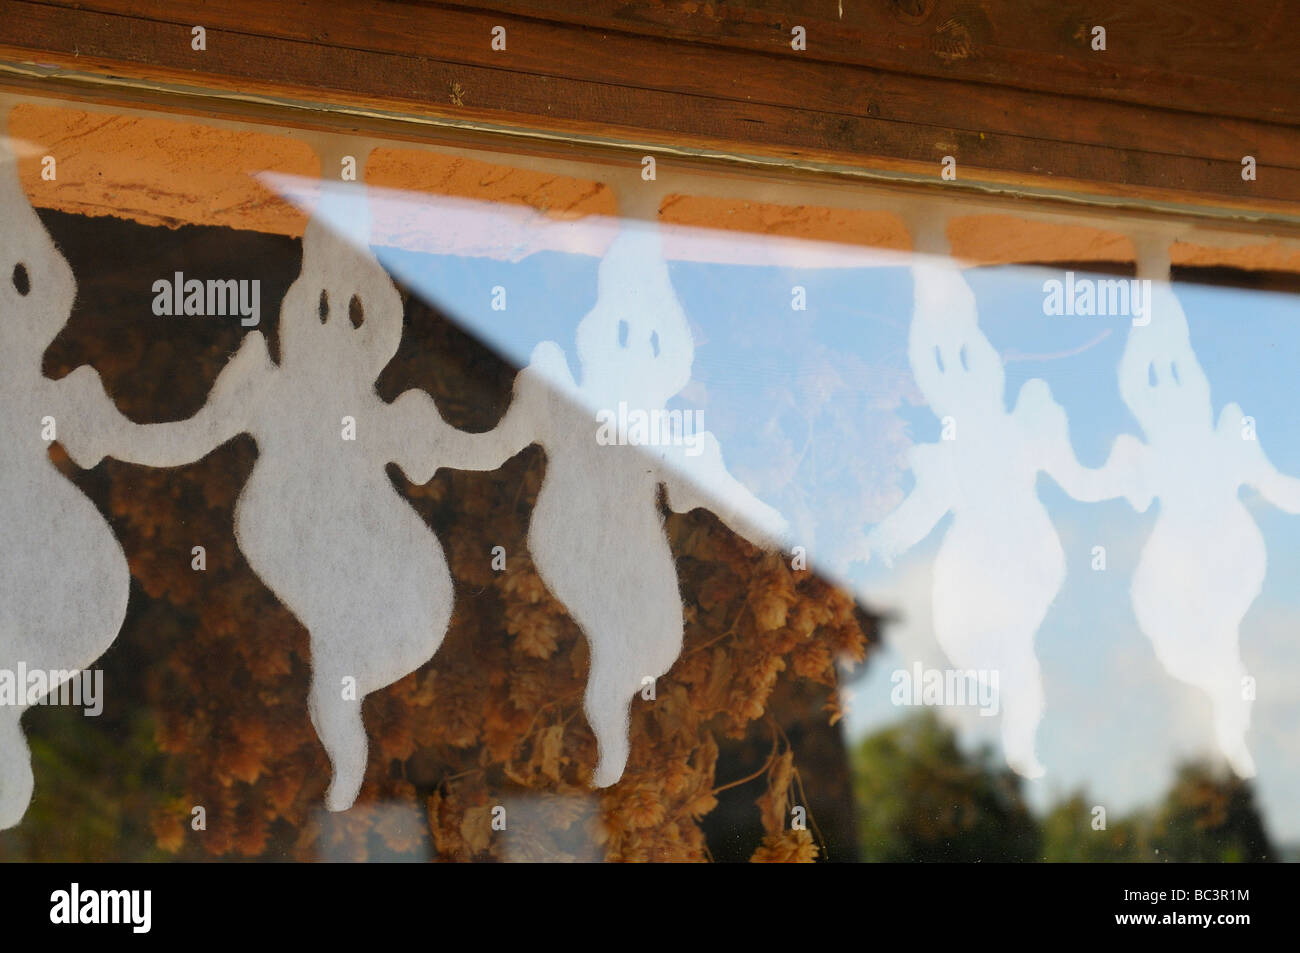 Cut out ghosts, the emblem of the Fantome Brewery, Belgium, backed by dry hops line window. Stock Photo